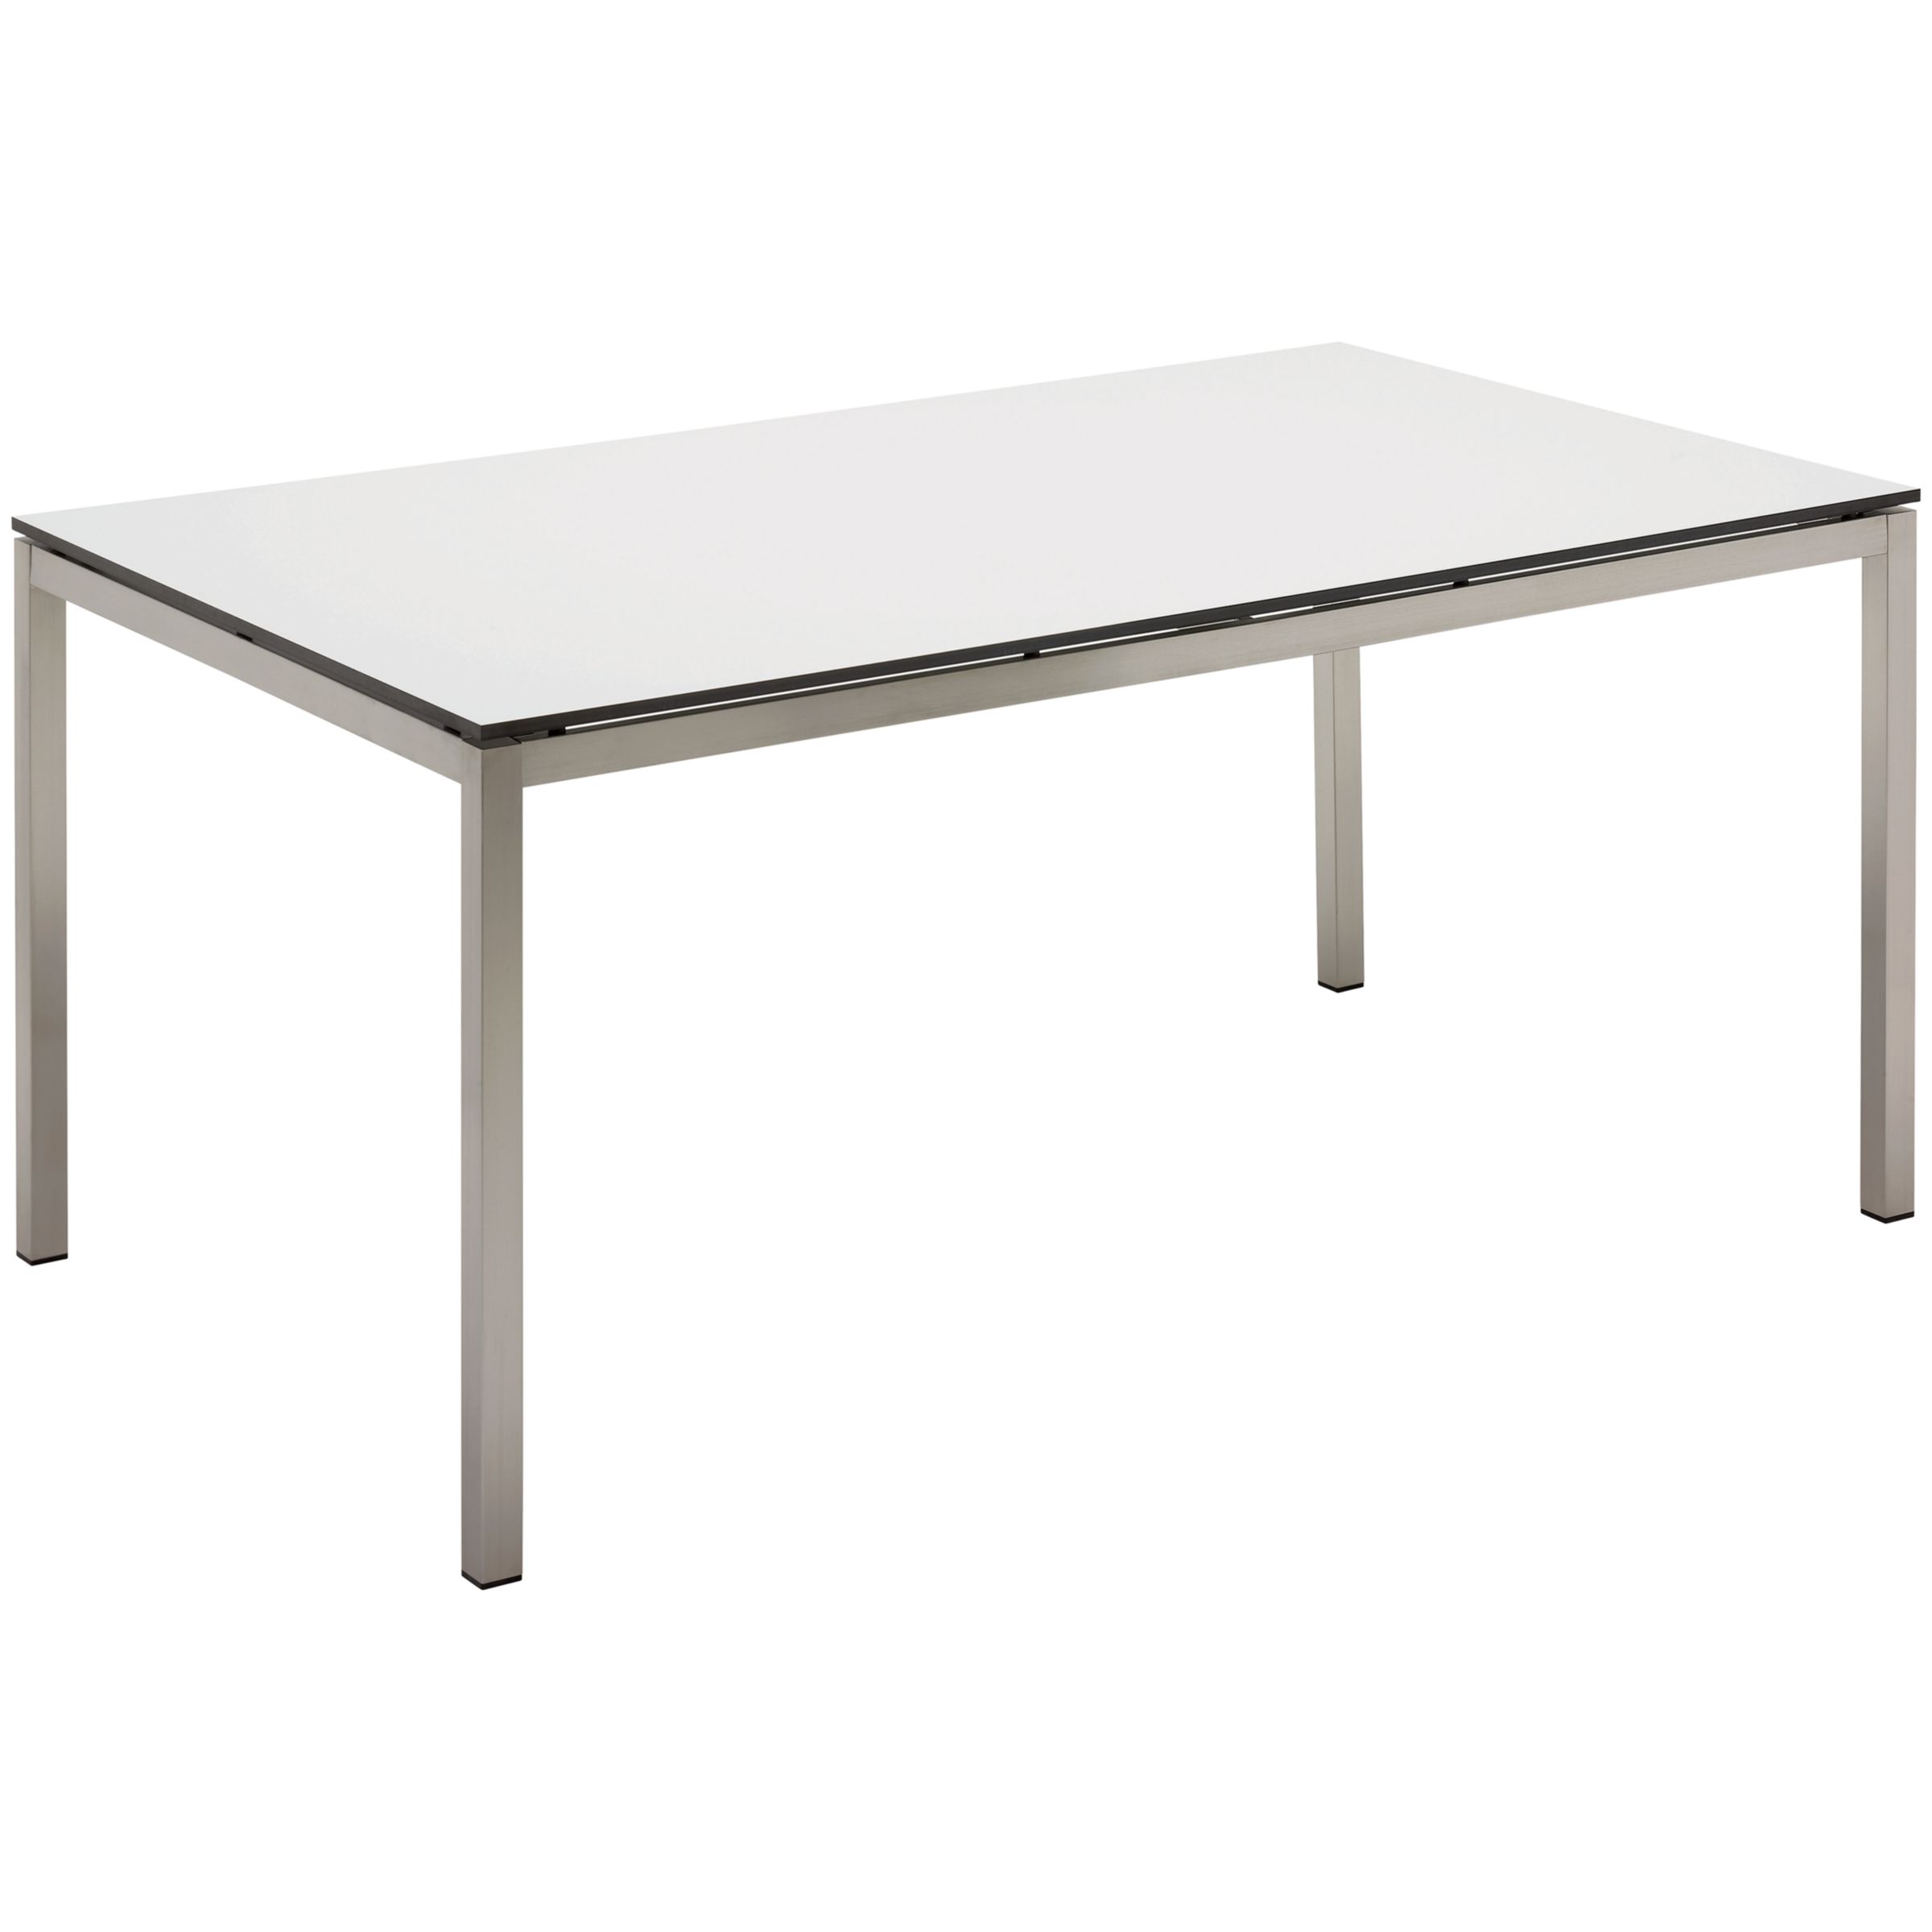 Gloster Kore Rectangular 6 Seater Outdoor Dining Table, White HPL, width 162cm